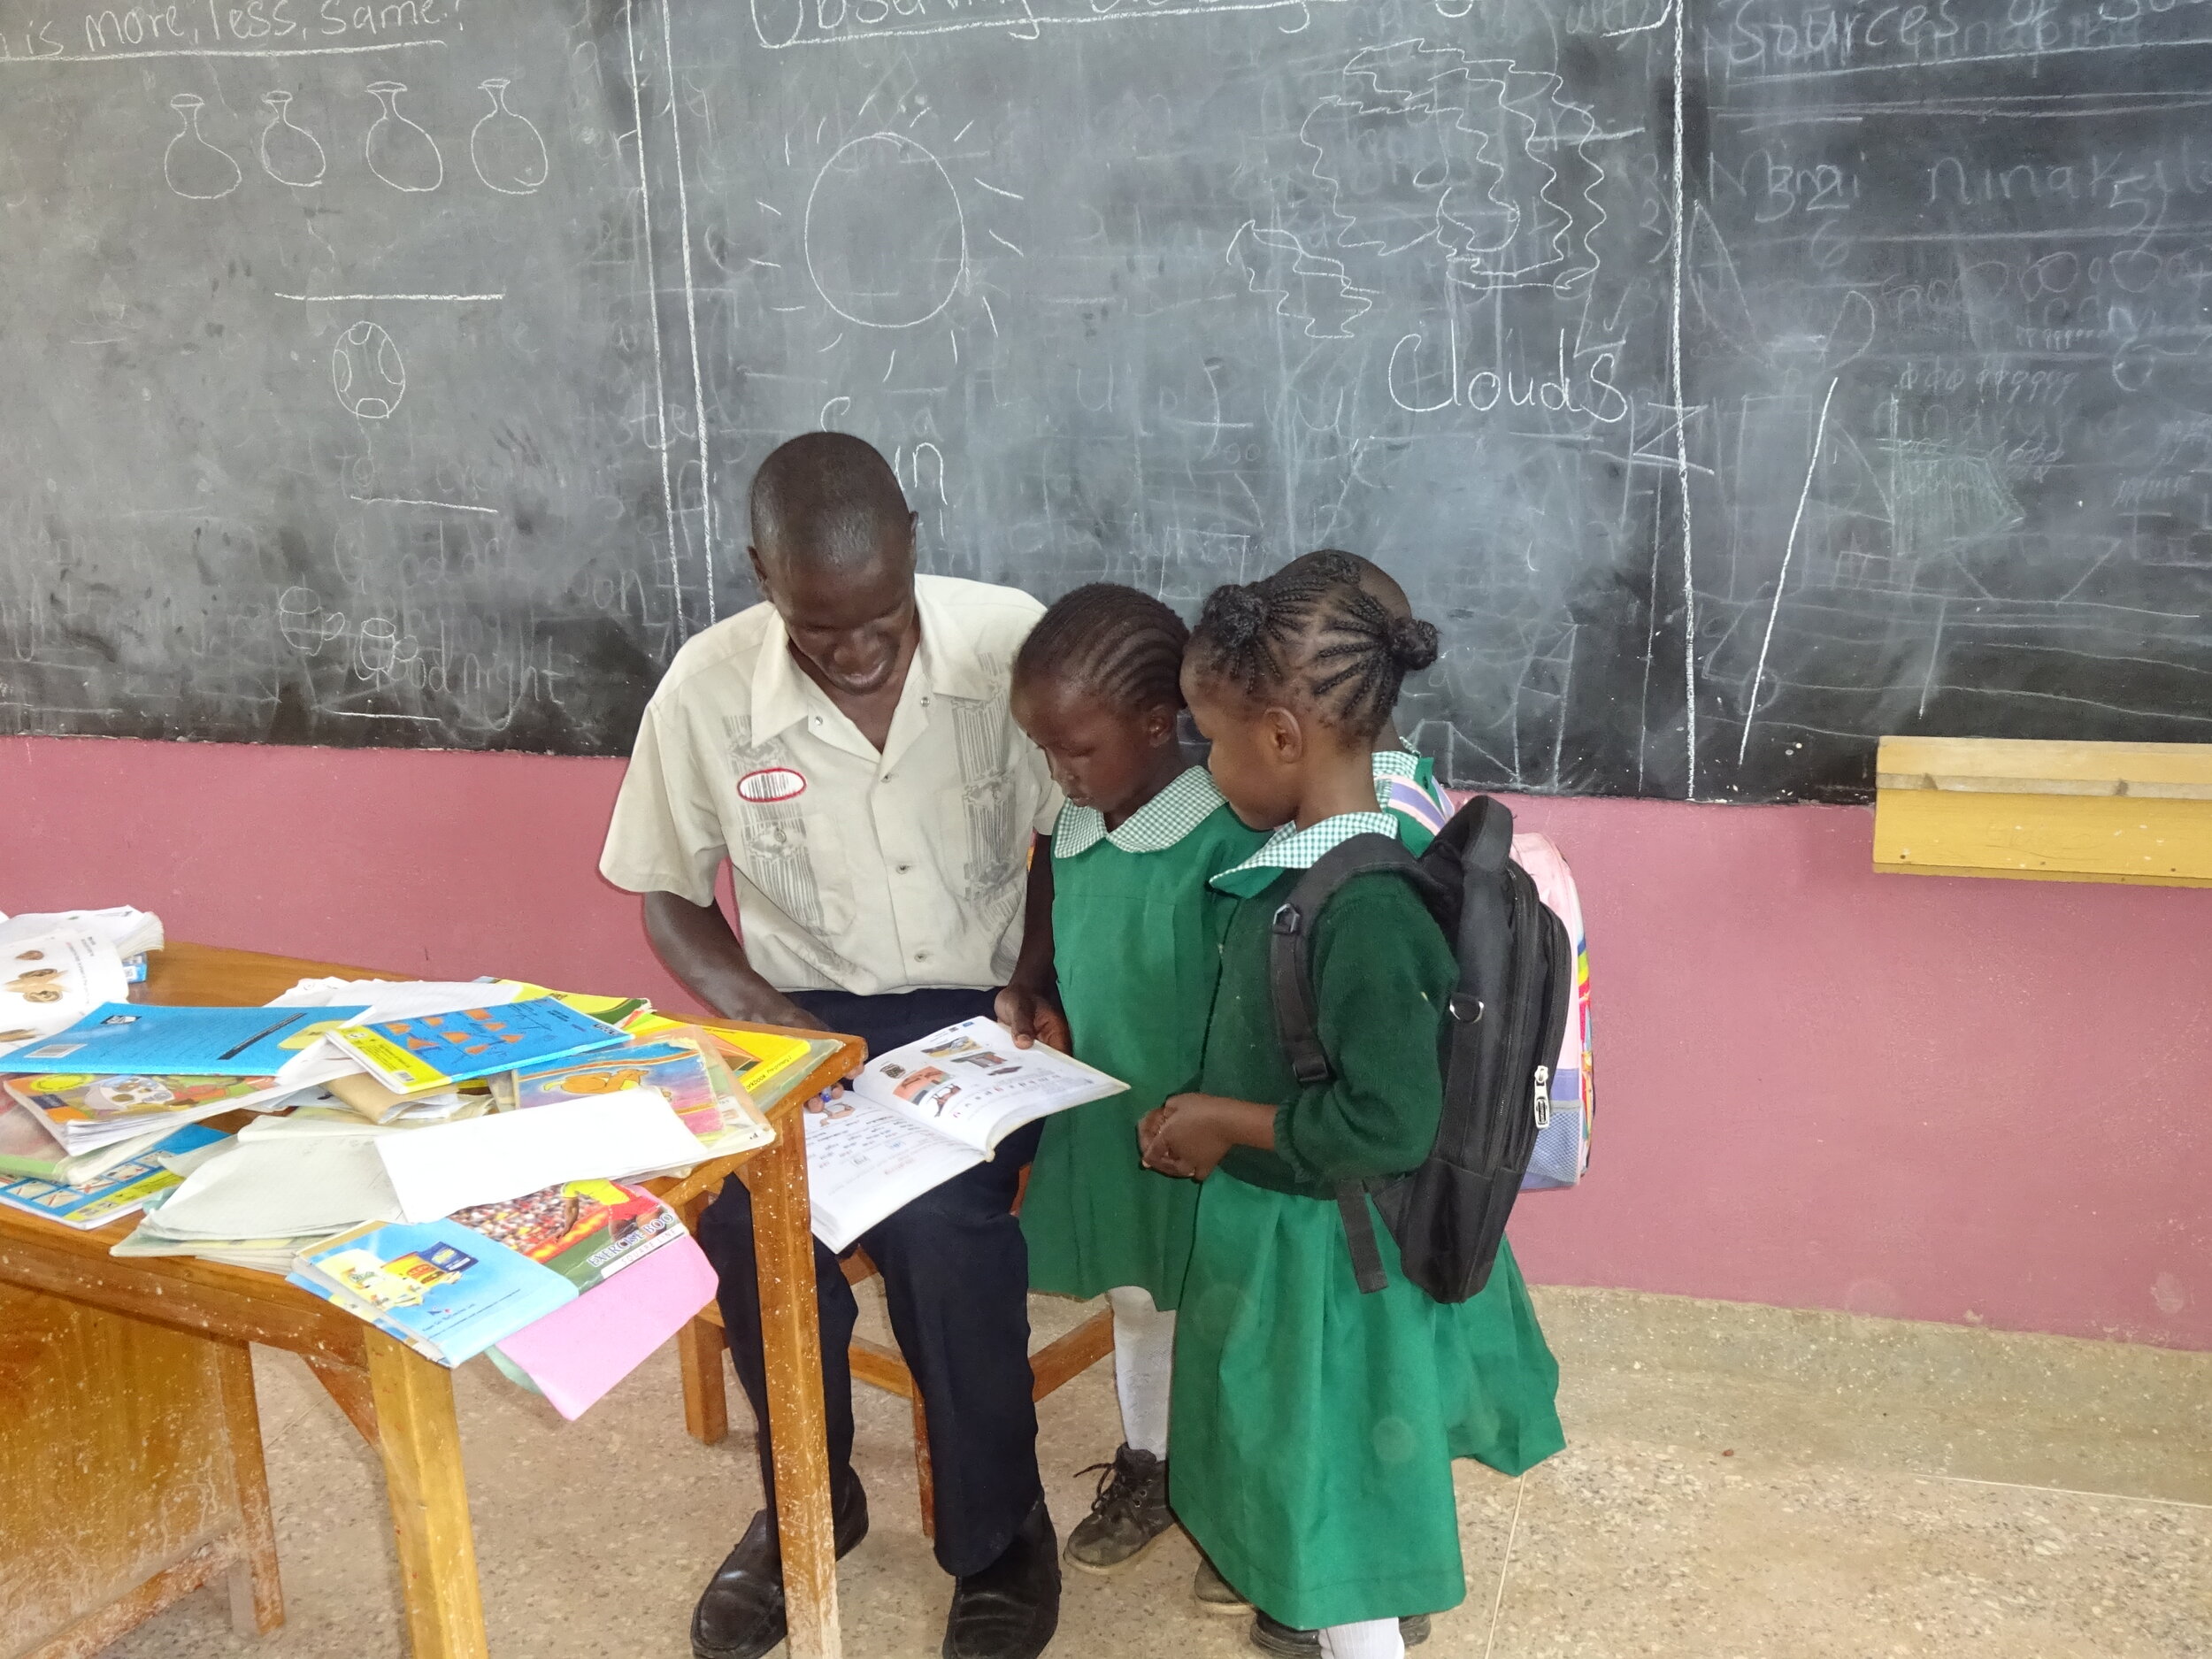 Kevin, a Mwanzo teacher, is  seated in front of a chalk board at a desk filled with many books. He is showing a lesson to two school girls.